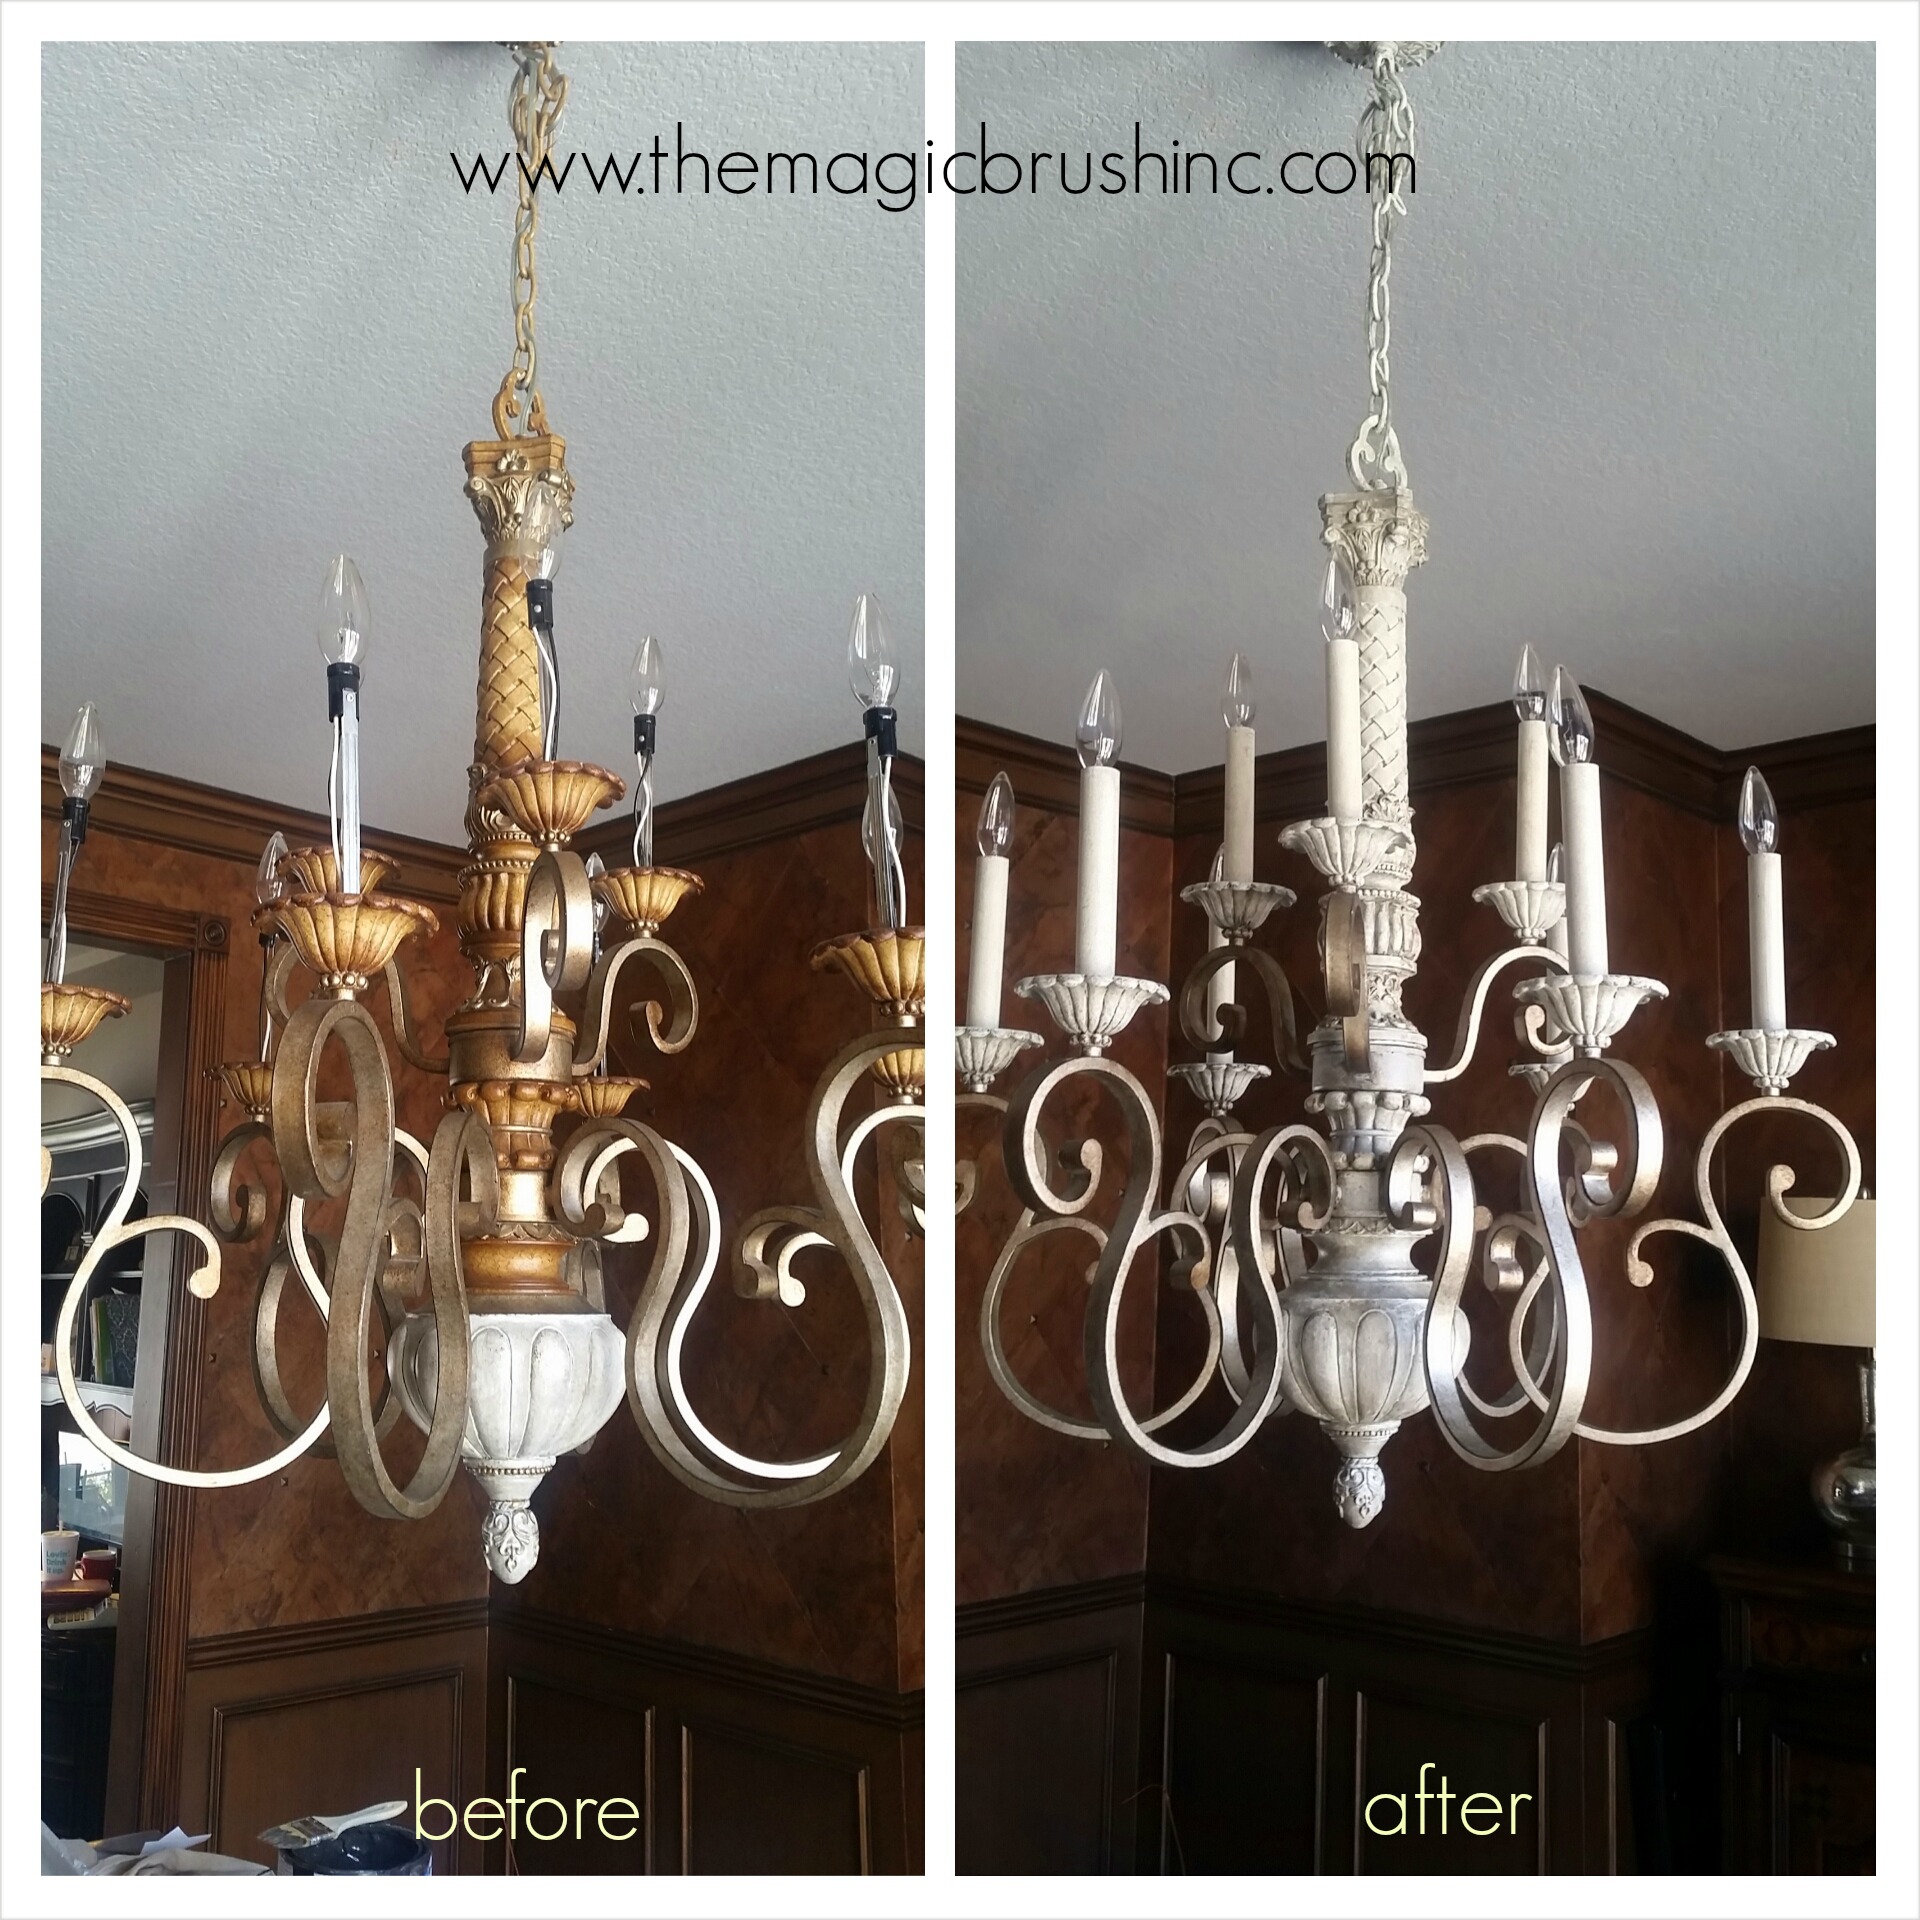 Painting Light Fixtures And Chandeliers, How To Paint Light Fixtures